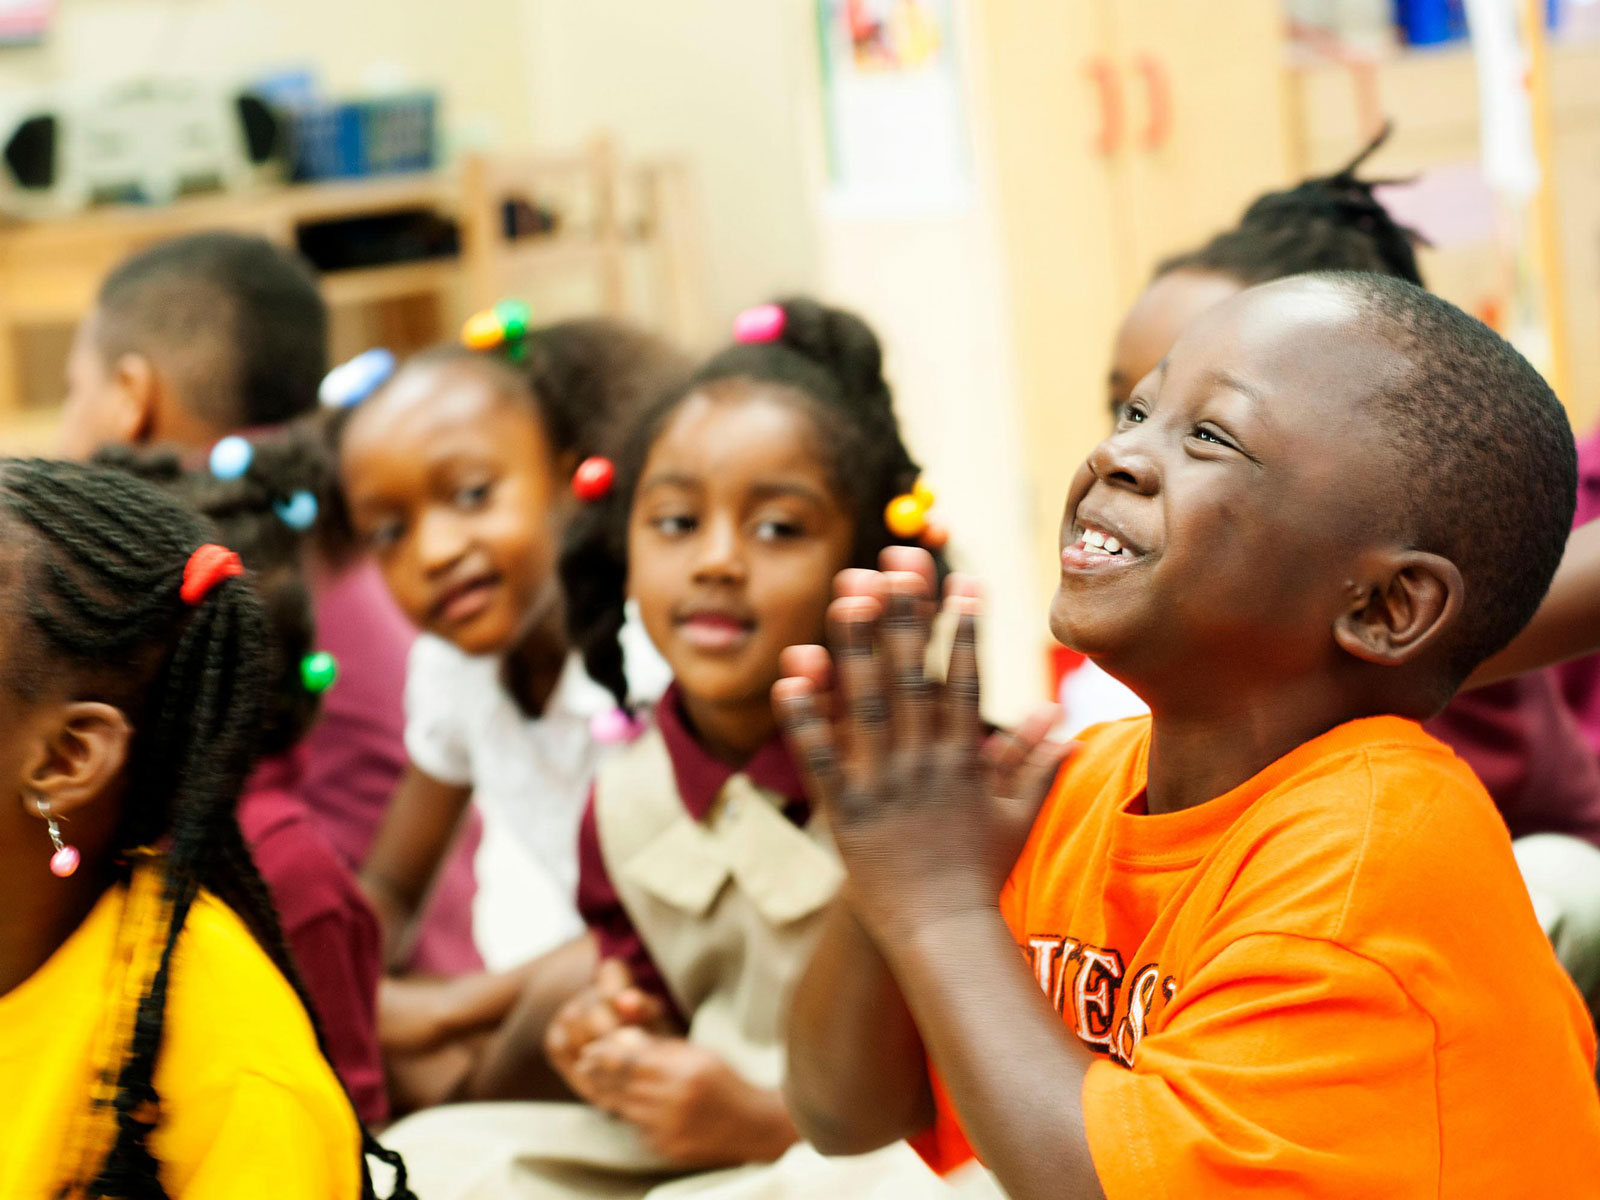 African American children laughing and smiling.